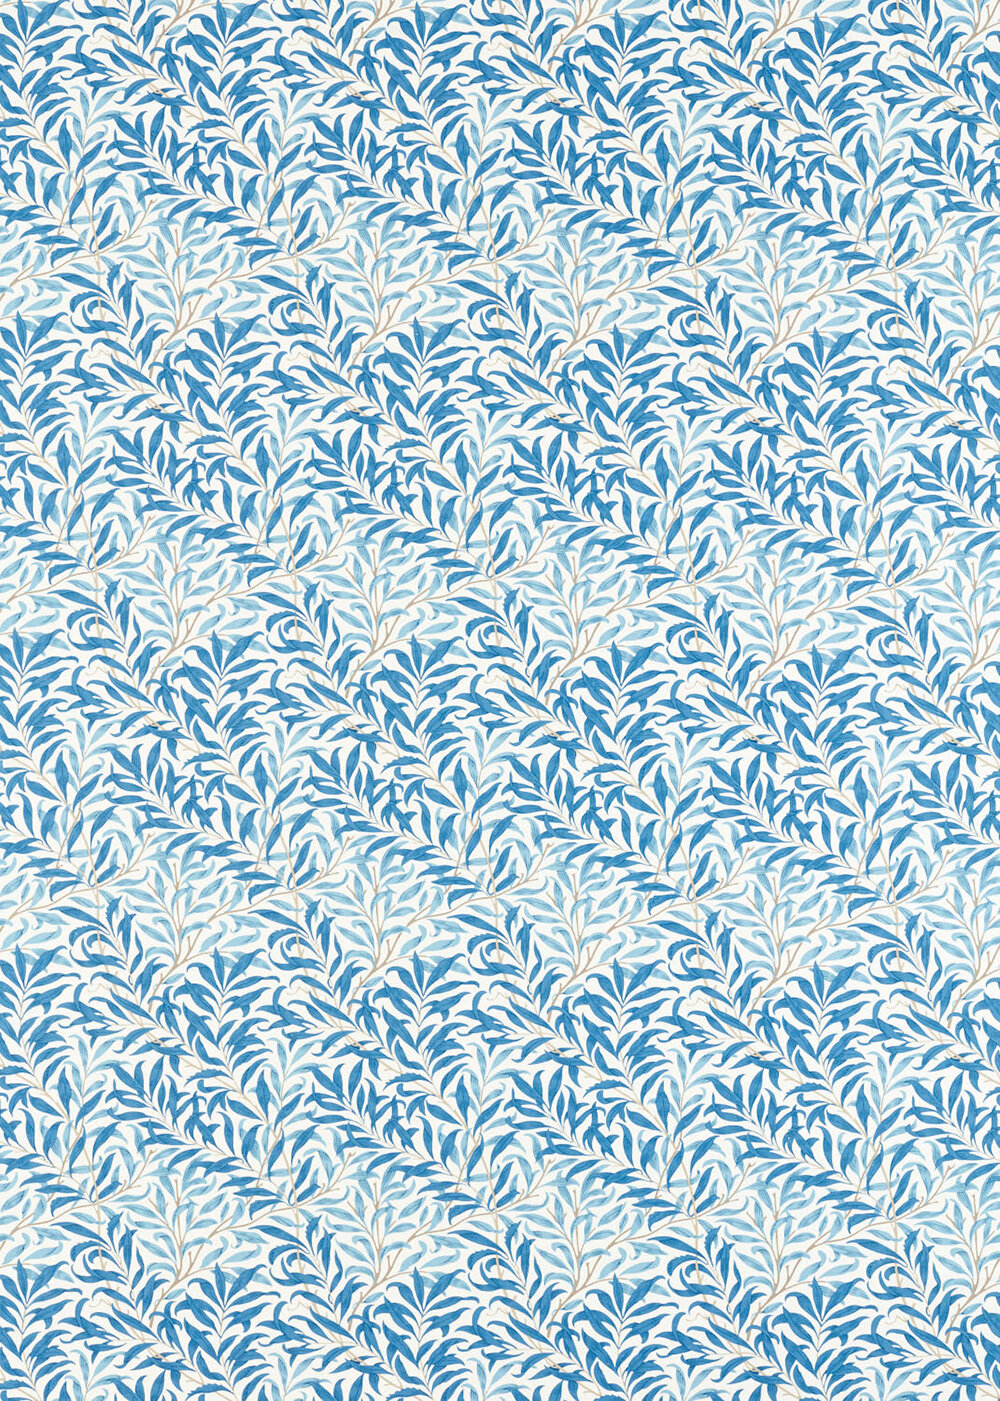 Willow Bough  Fabric - Woad - by Morris